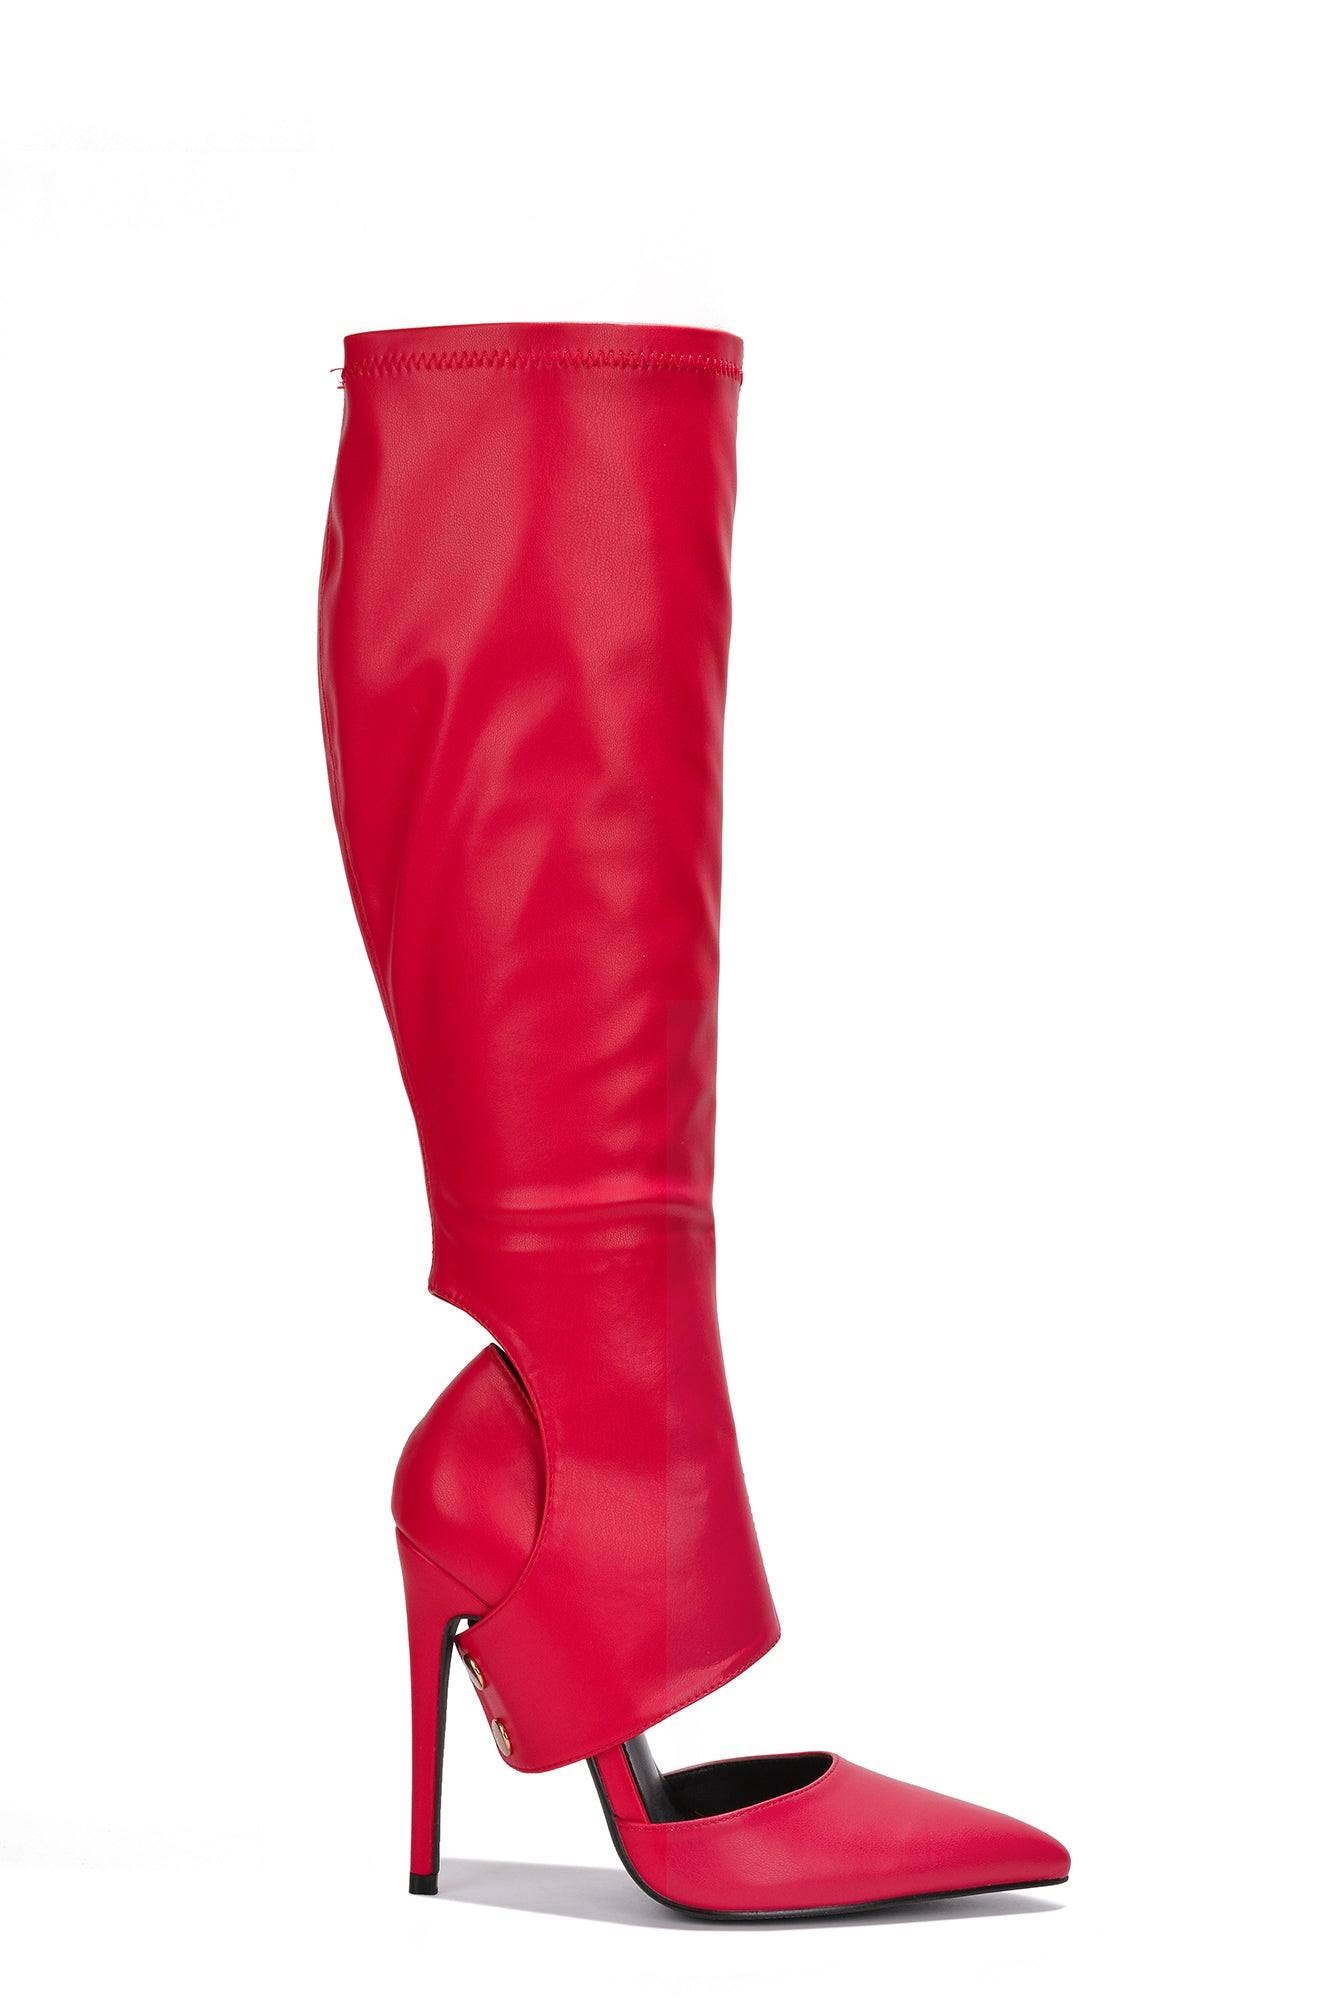 Versatile Red Knee Boots for Fashionable Flair | Image